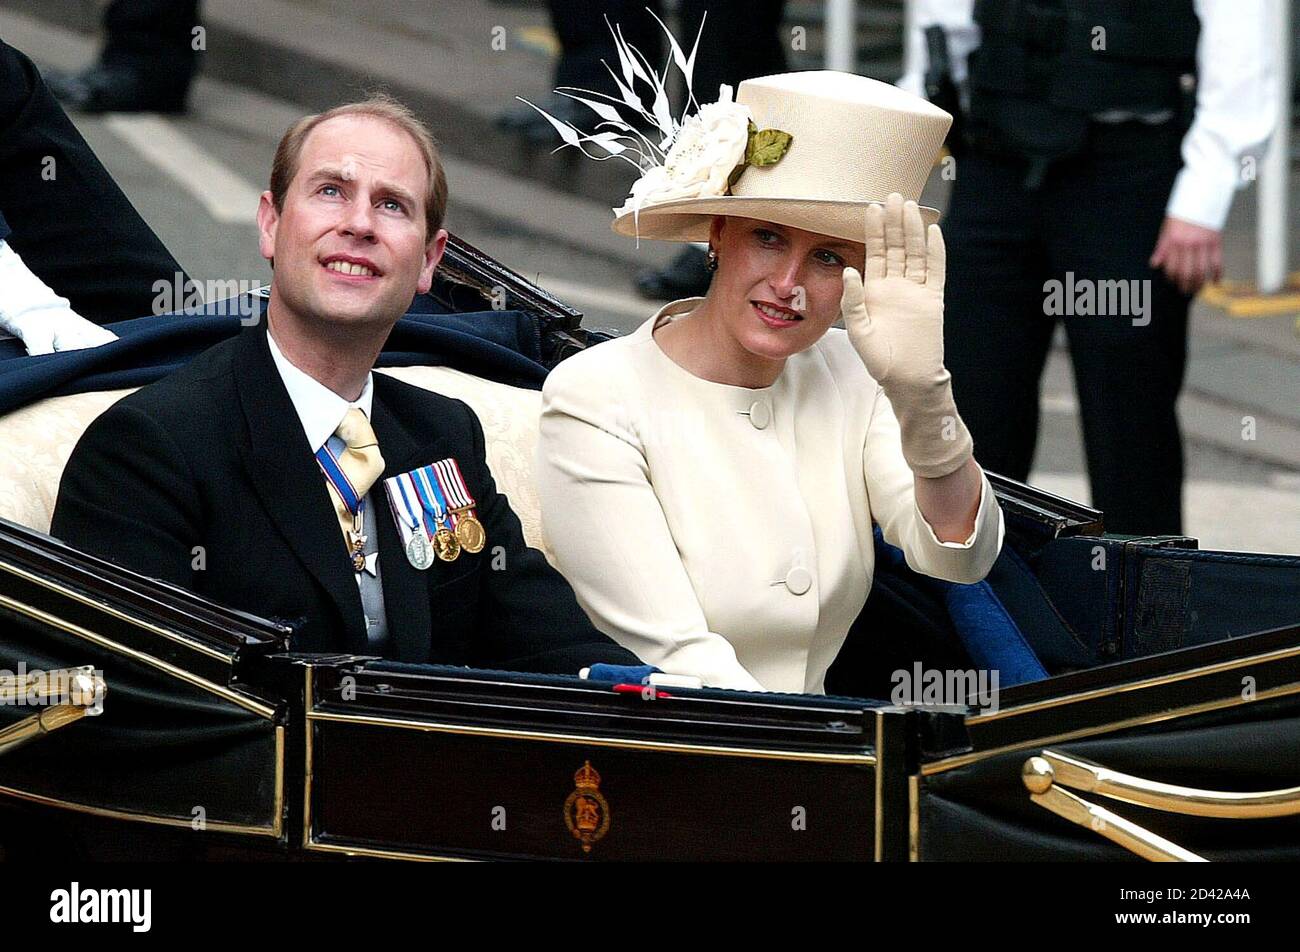 britains-earl-l-and-countess-of-wessex-wave-to-the-crowds-en-route-to-st-pauls-cathedral-for-the-golden-jubilee-service-of-thanksgiving-in-london-june-4-2002-thousands-of-people-gathered-in-central-london-for-the-festivities-on-the-final-day-of-the-celebratory-weekend-marking-the-queens-50th-year-on-the-throne-reutersstephen-hird-shnmb-2D42A4A.jpg